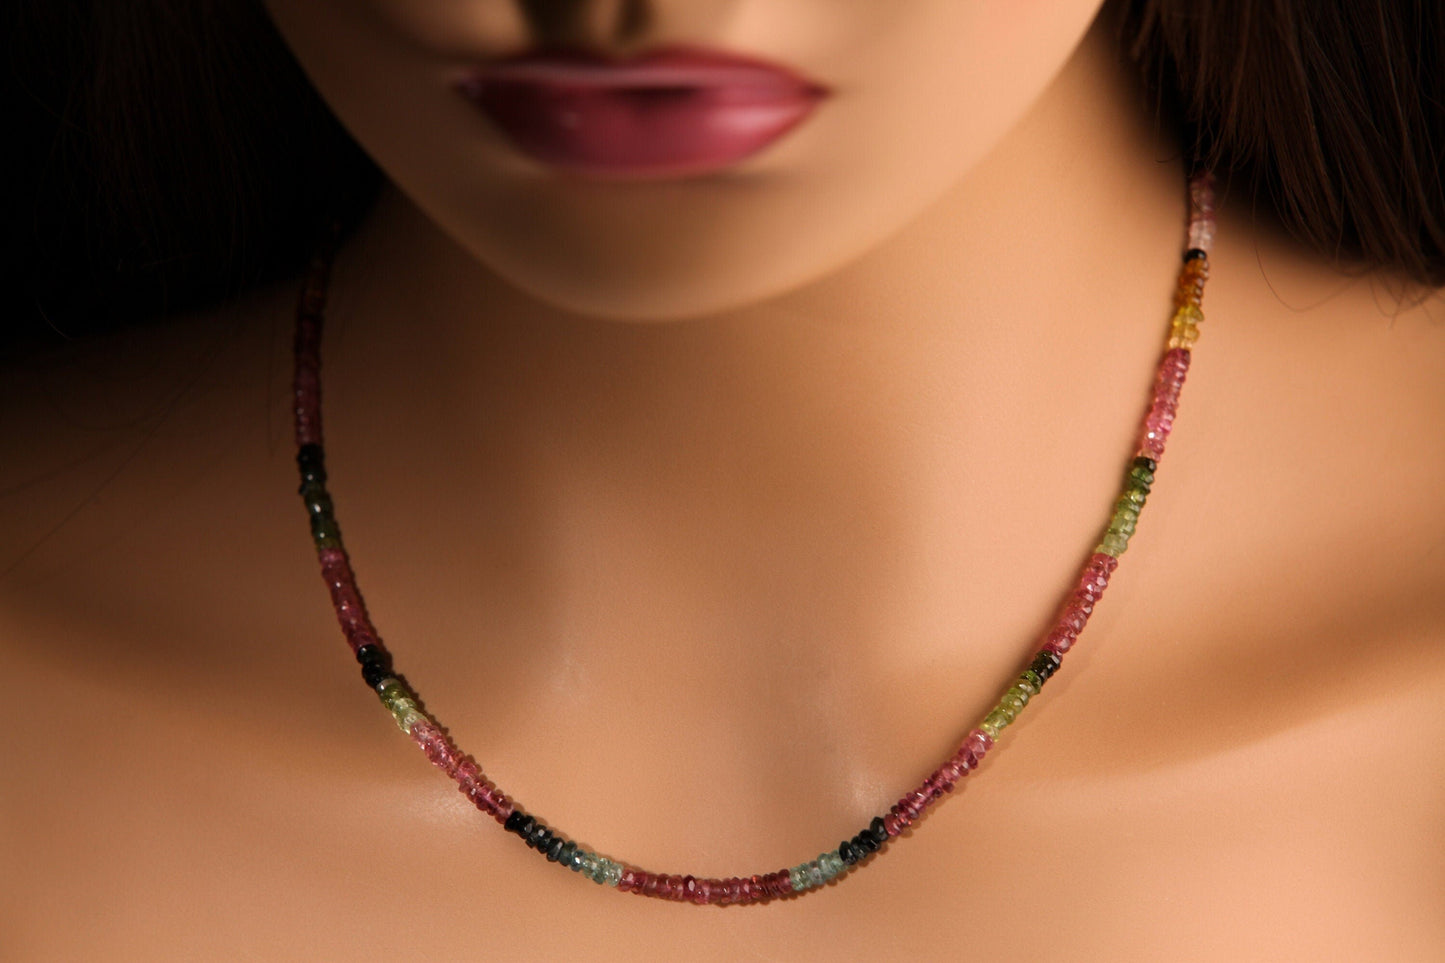 SALE--Natural Multi Watermelon Tourmaline 4mm Faceted AAA Rondelle Necklace & Bracelet 925 Sterling Silver,14k GF Clasp, Healing, Energy,